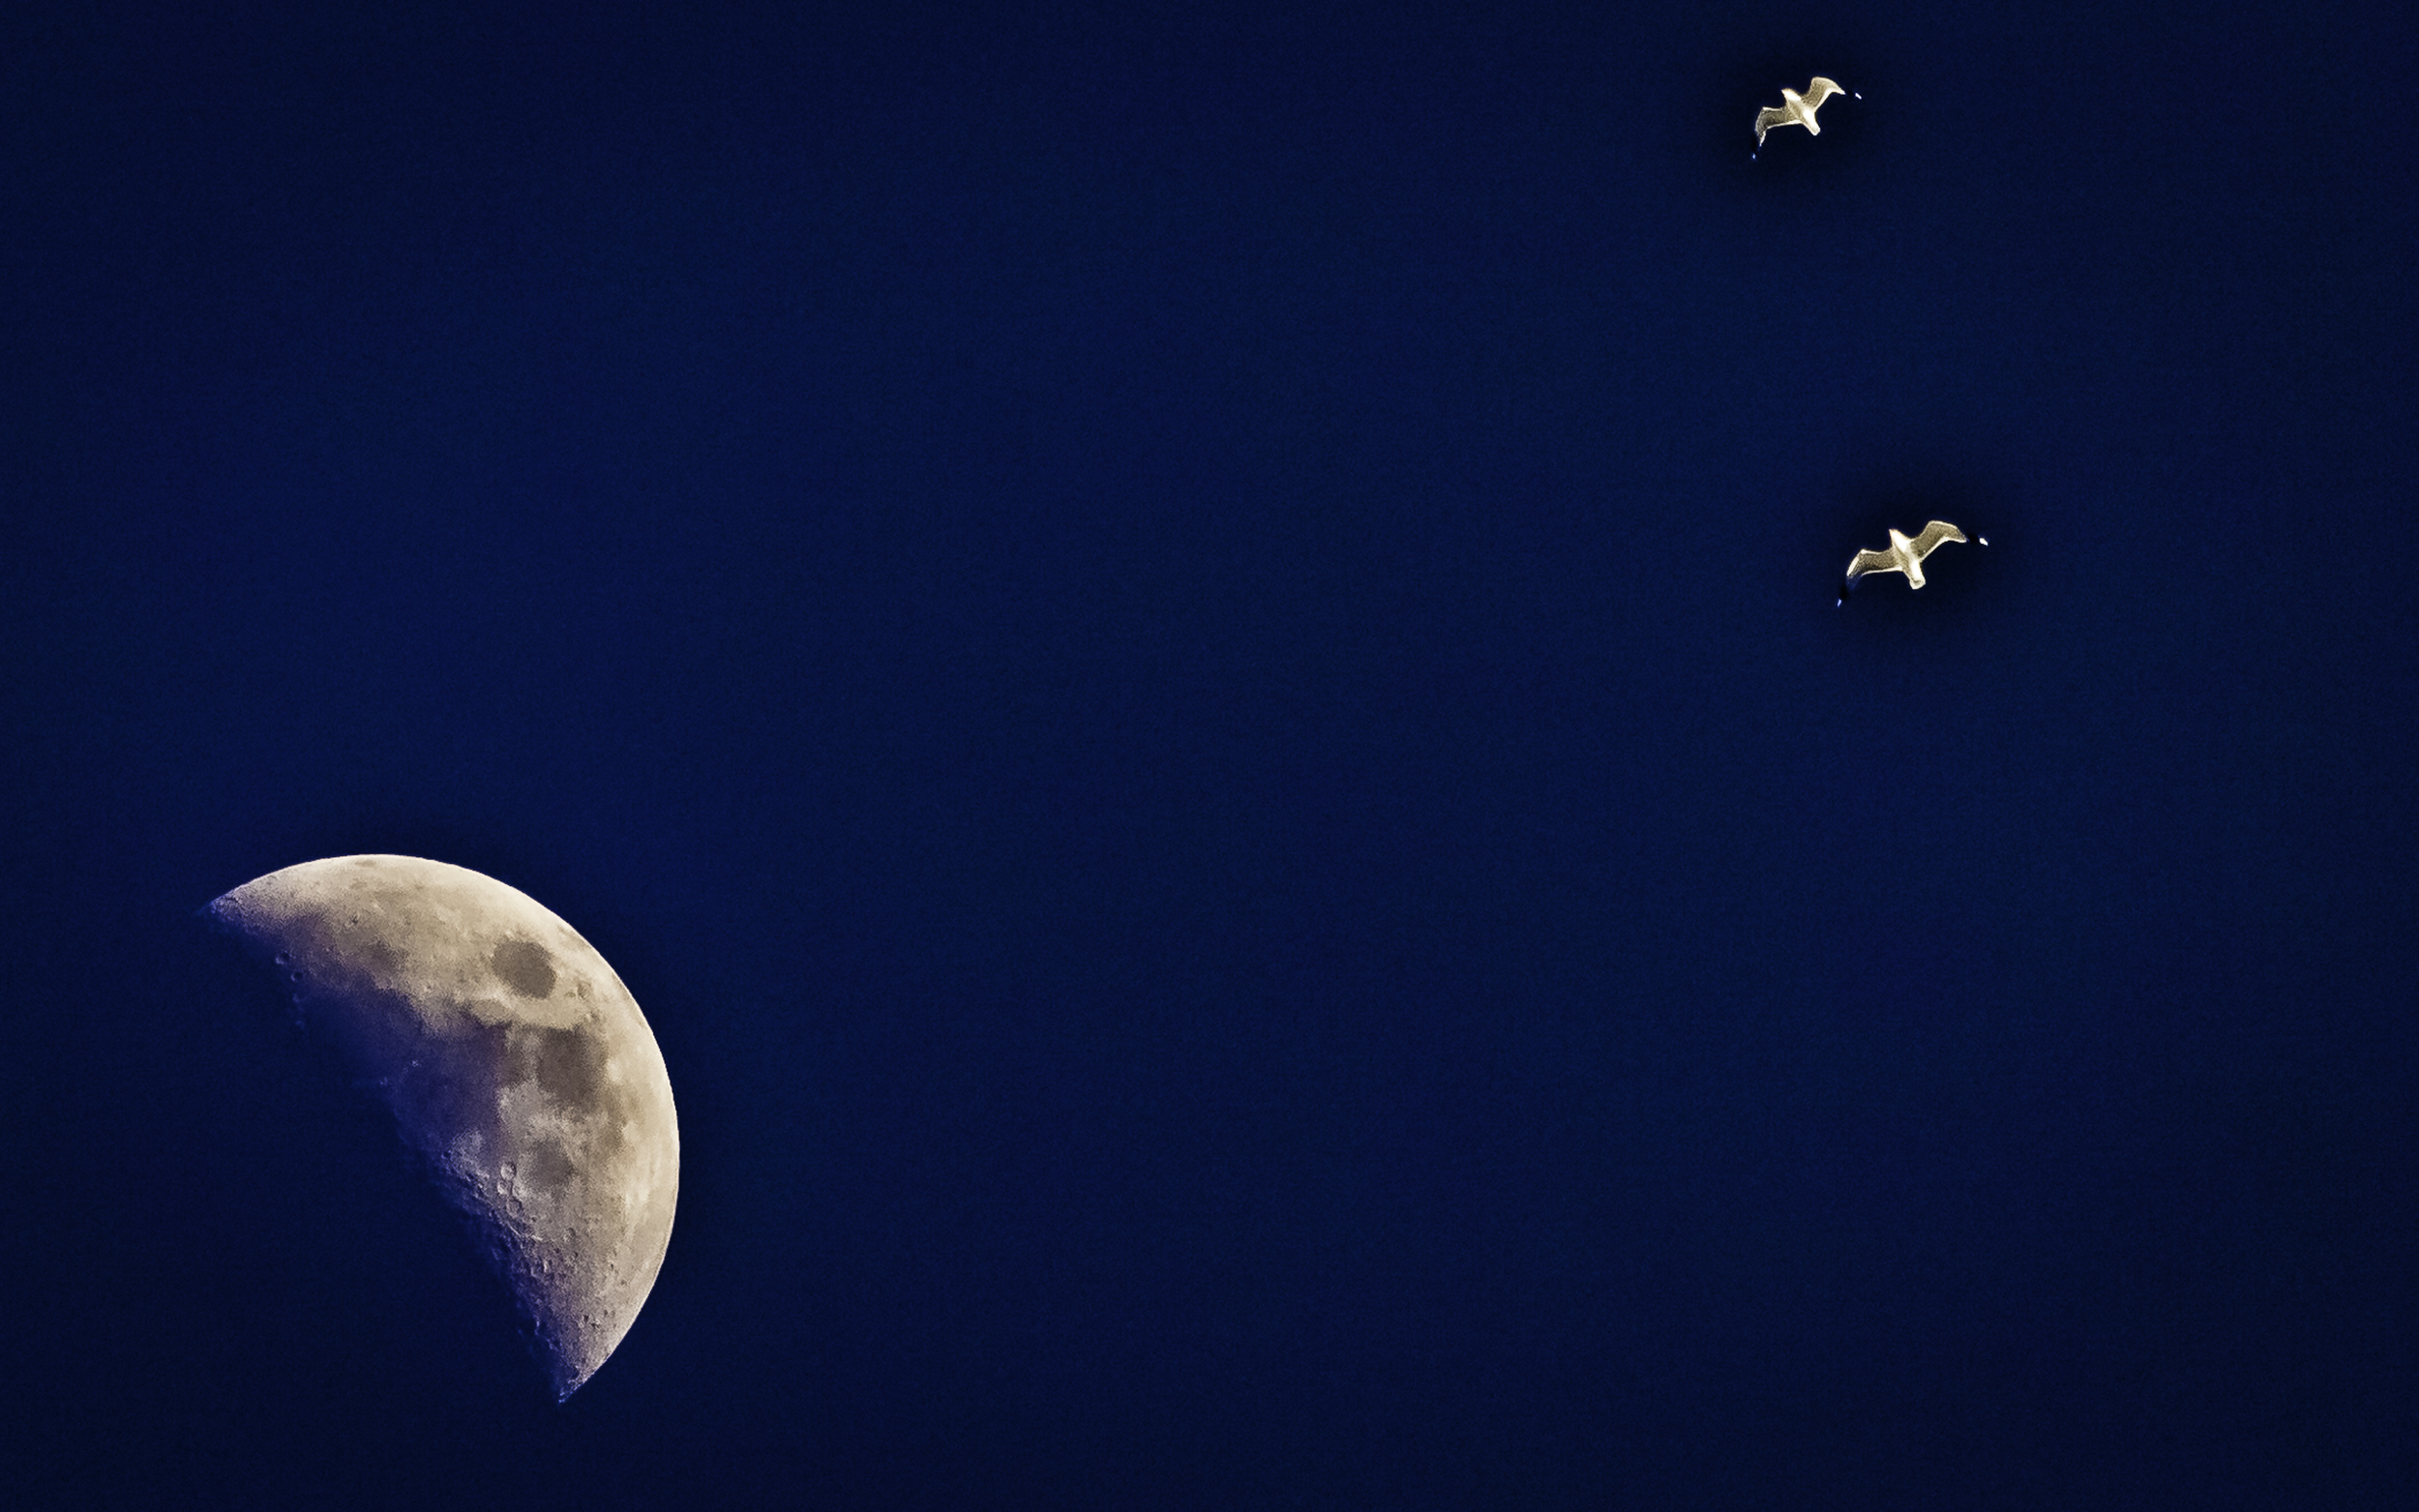 The Moon And Its Two Gull Friends Make a Handsome Threesome